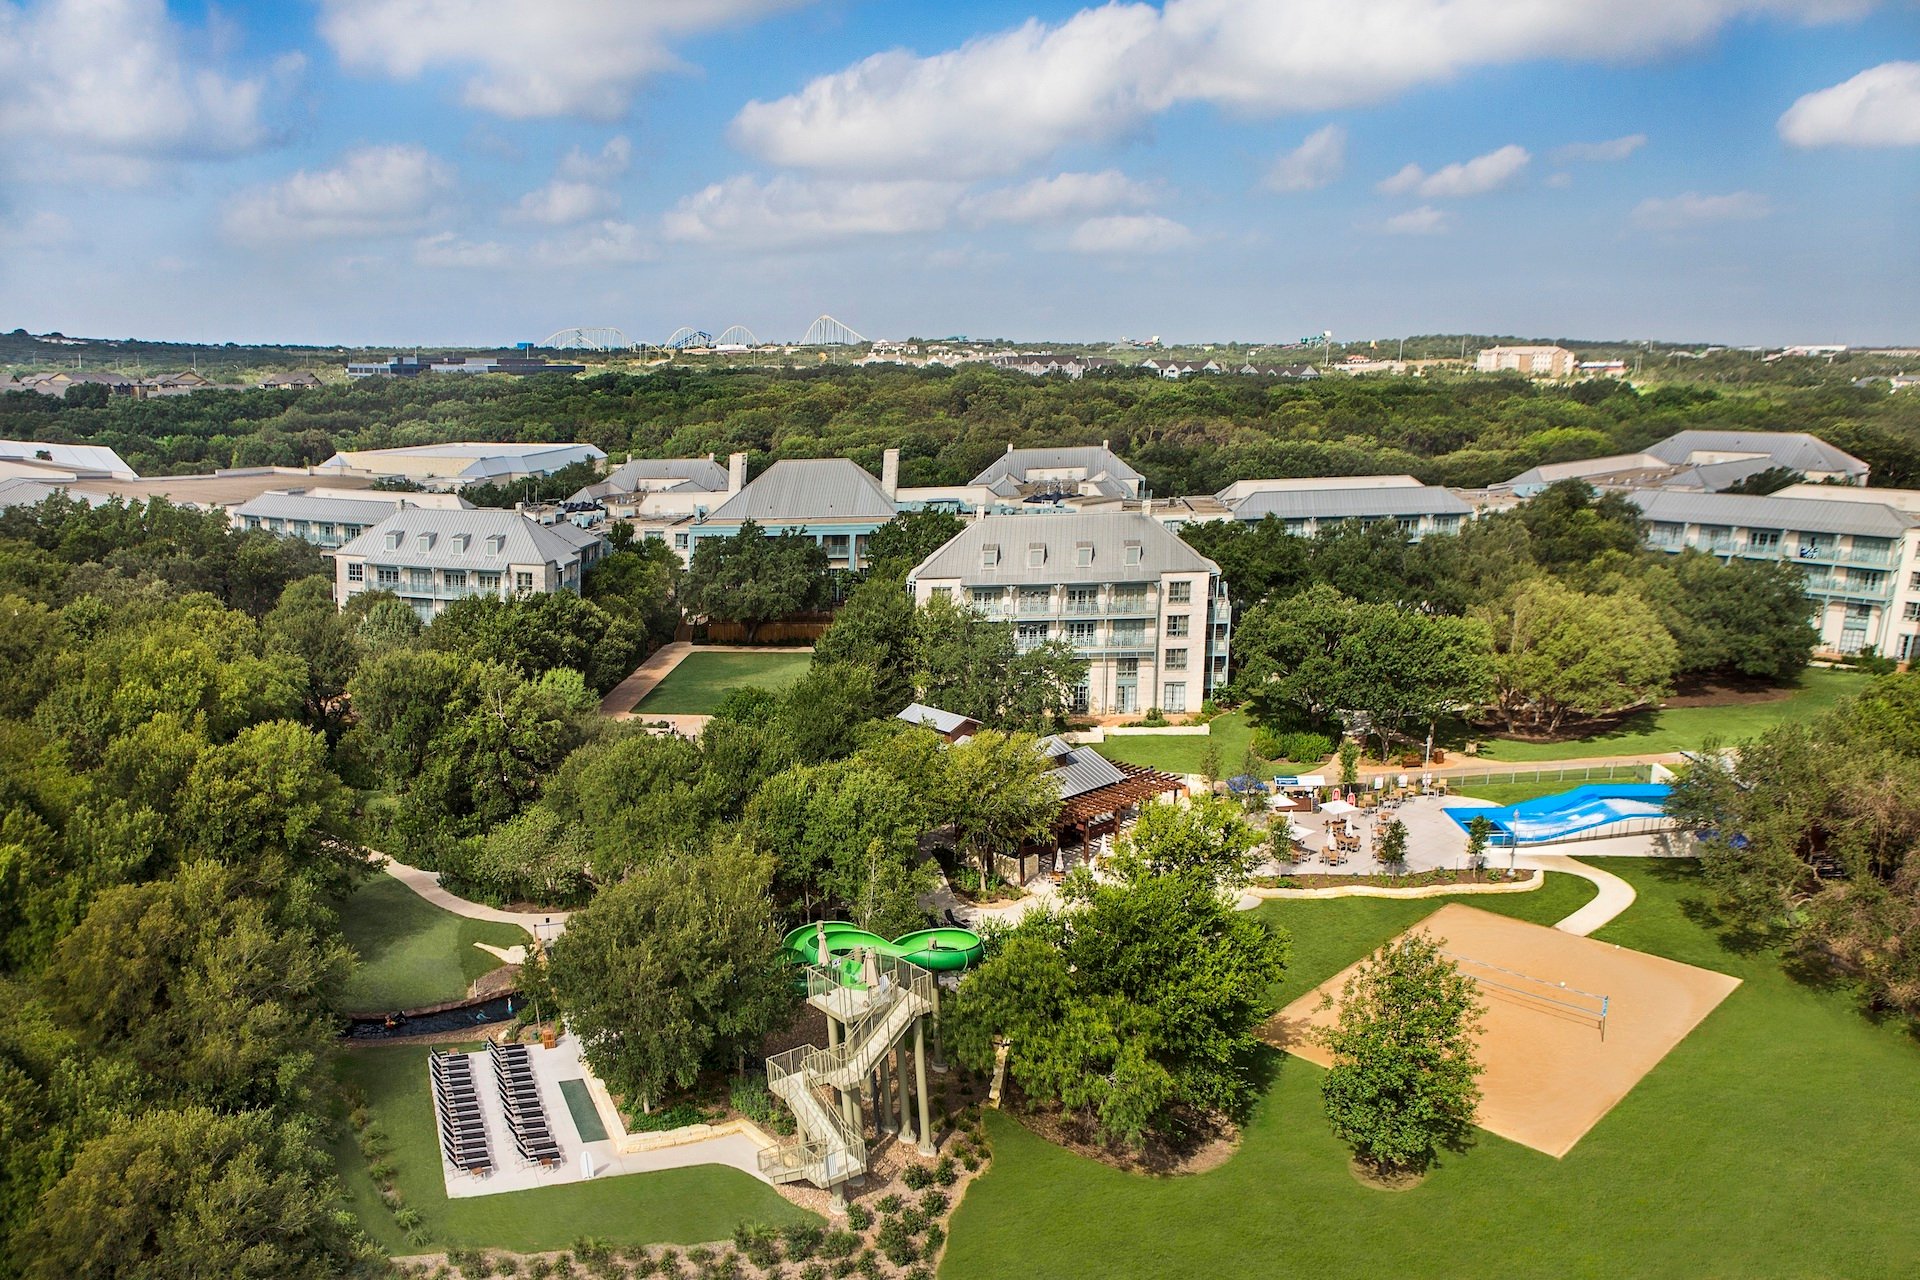 An aerial view of the Hyatt Regency Hill Country Resort and Spa, one of the top wedding venues in the Texas hill country.